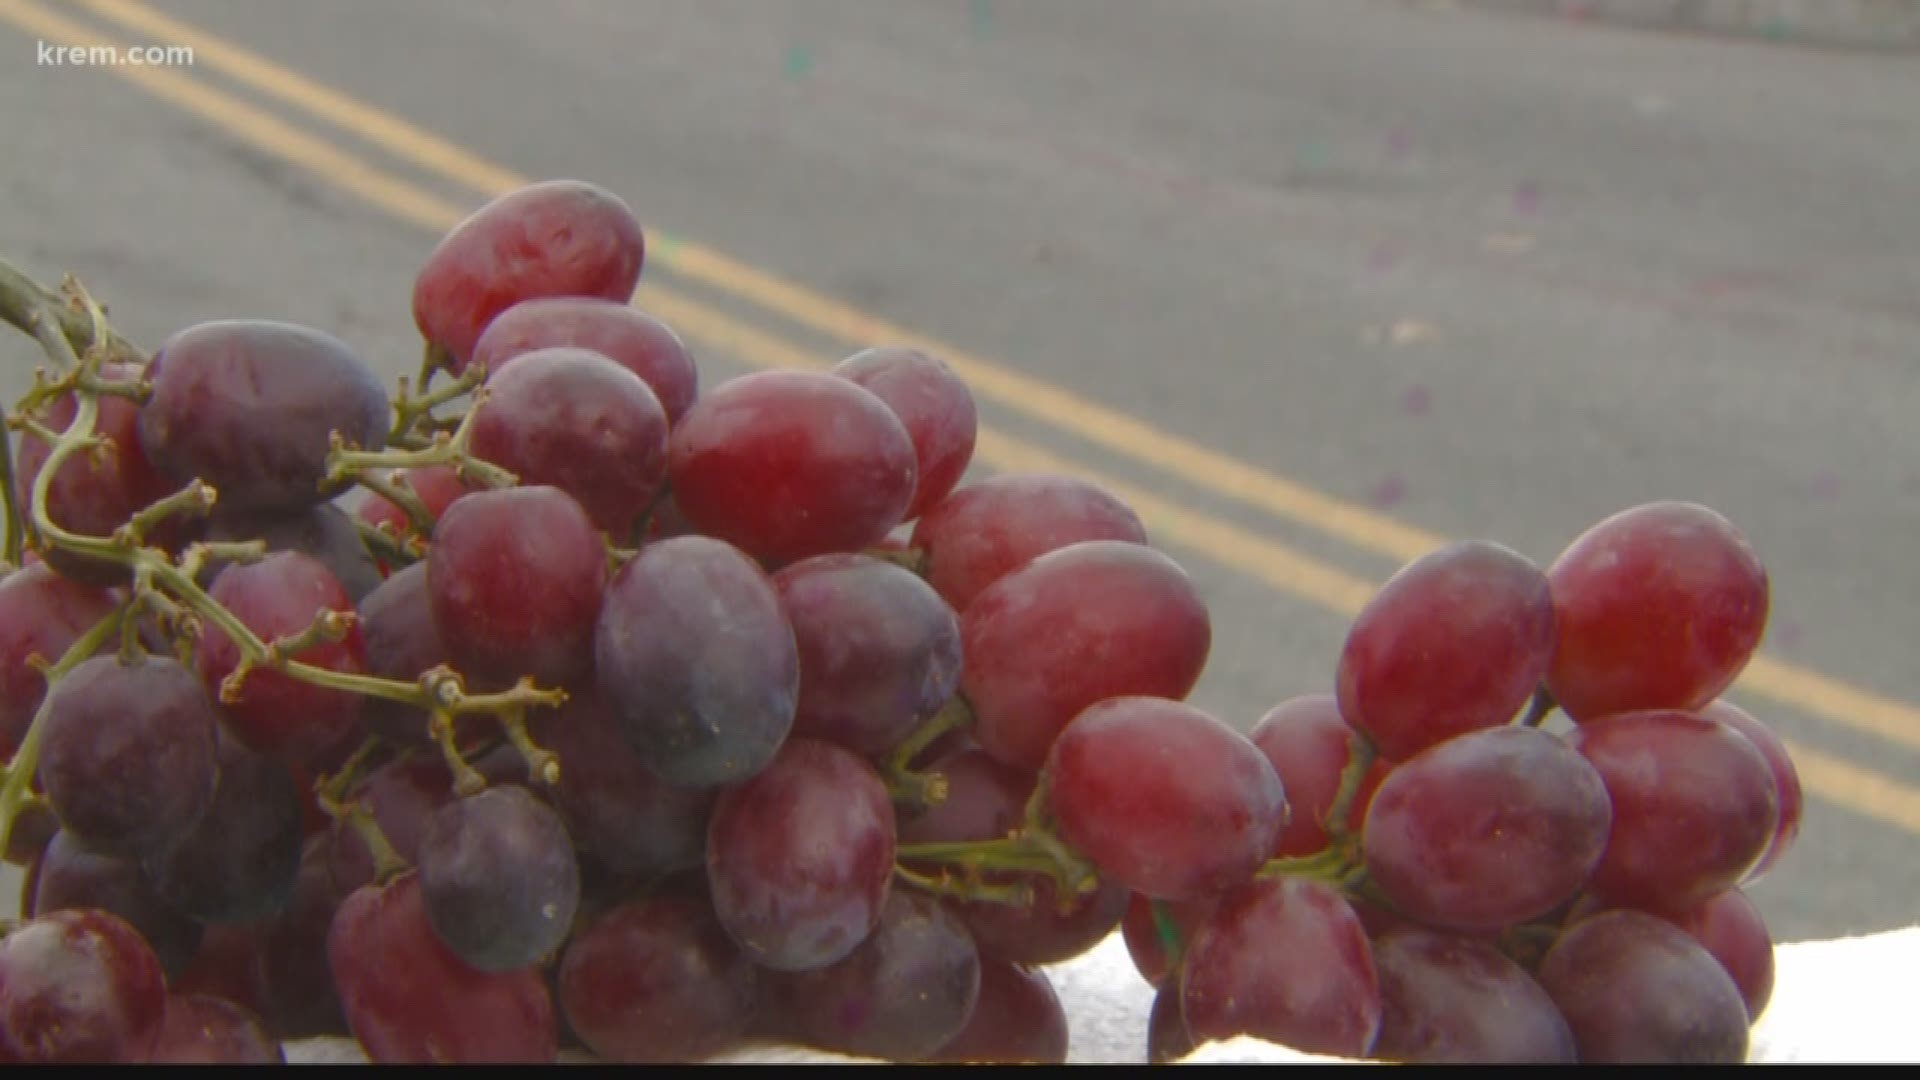 WSU researchers are testing if grape skins can be used as a deicer that is more environmentally friendly and road-safe than traditional deicer.